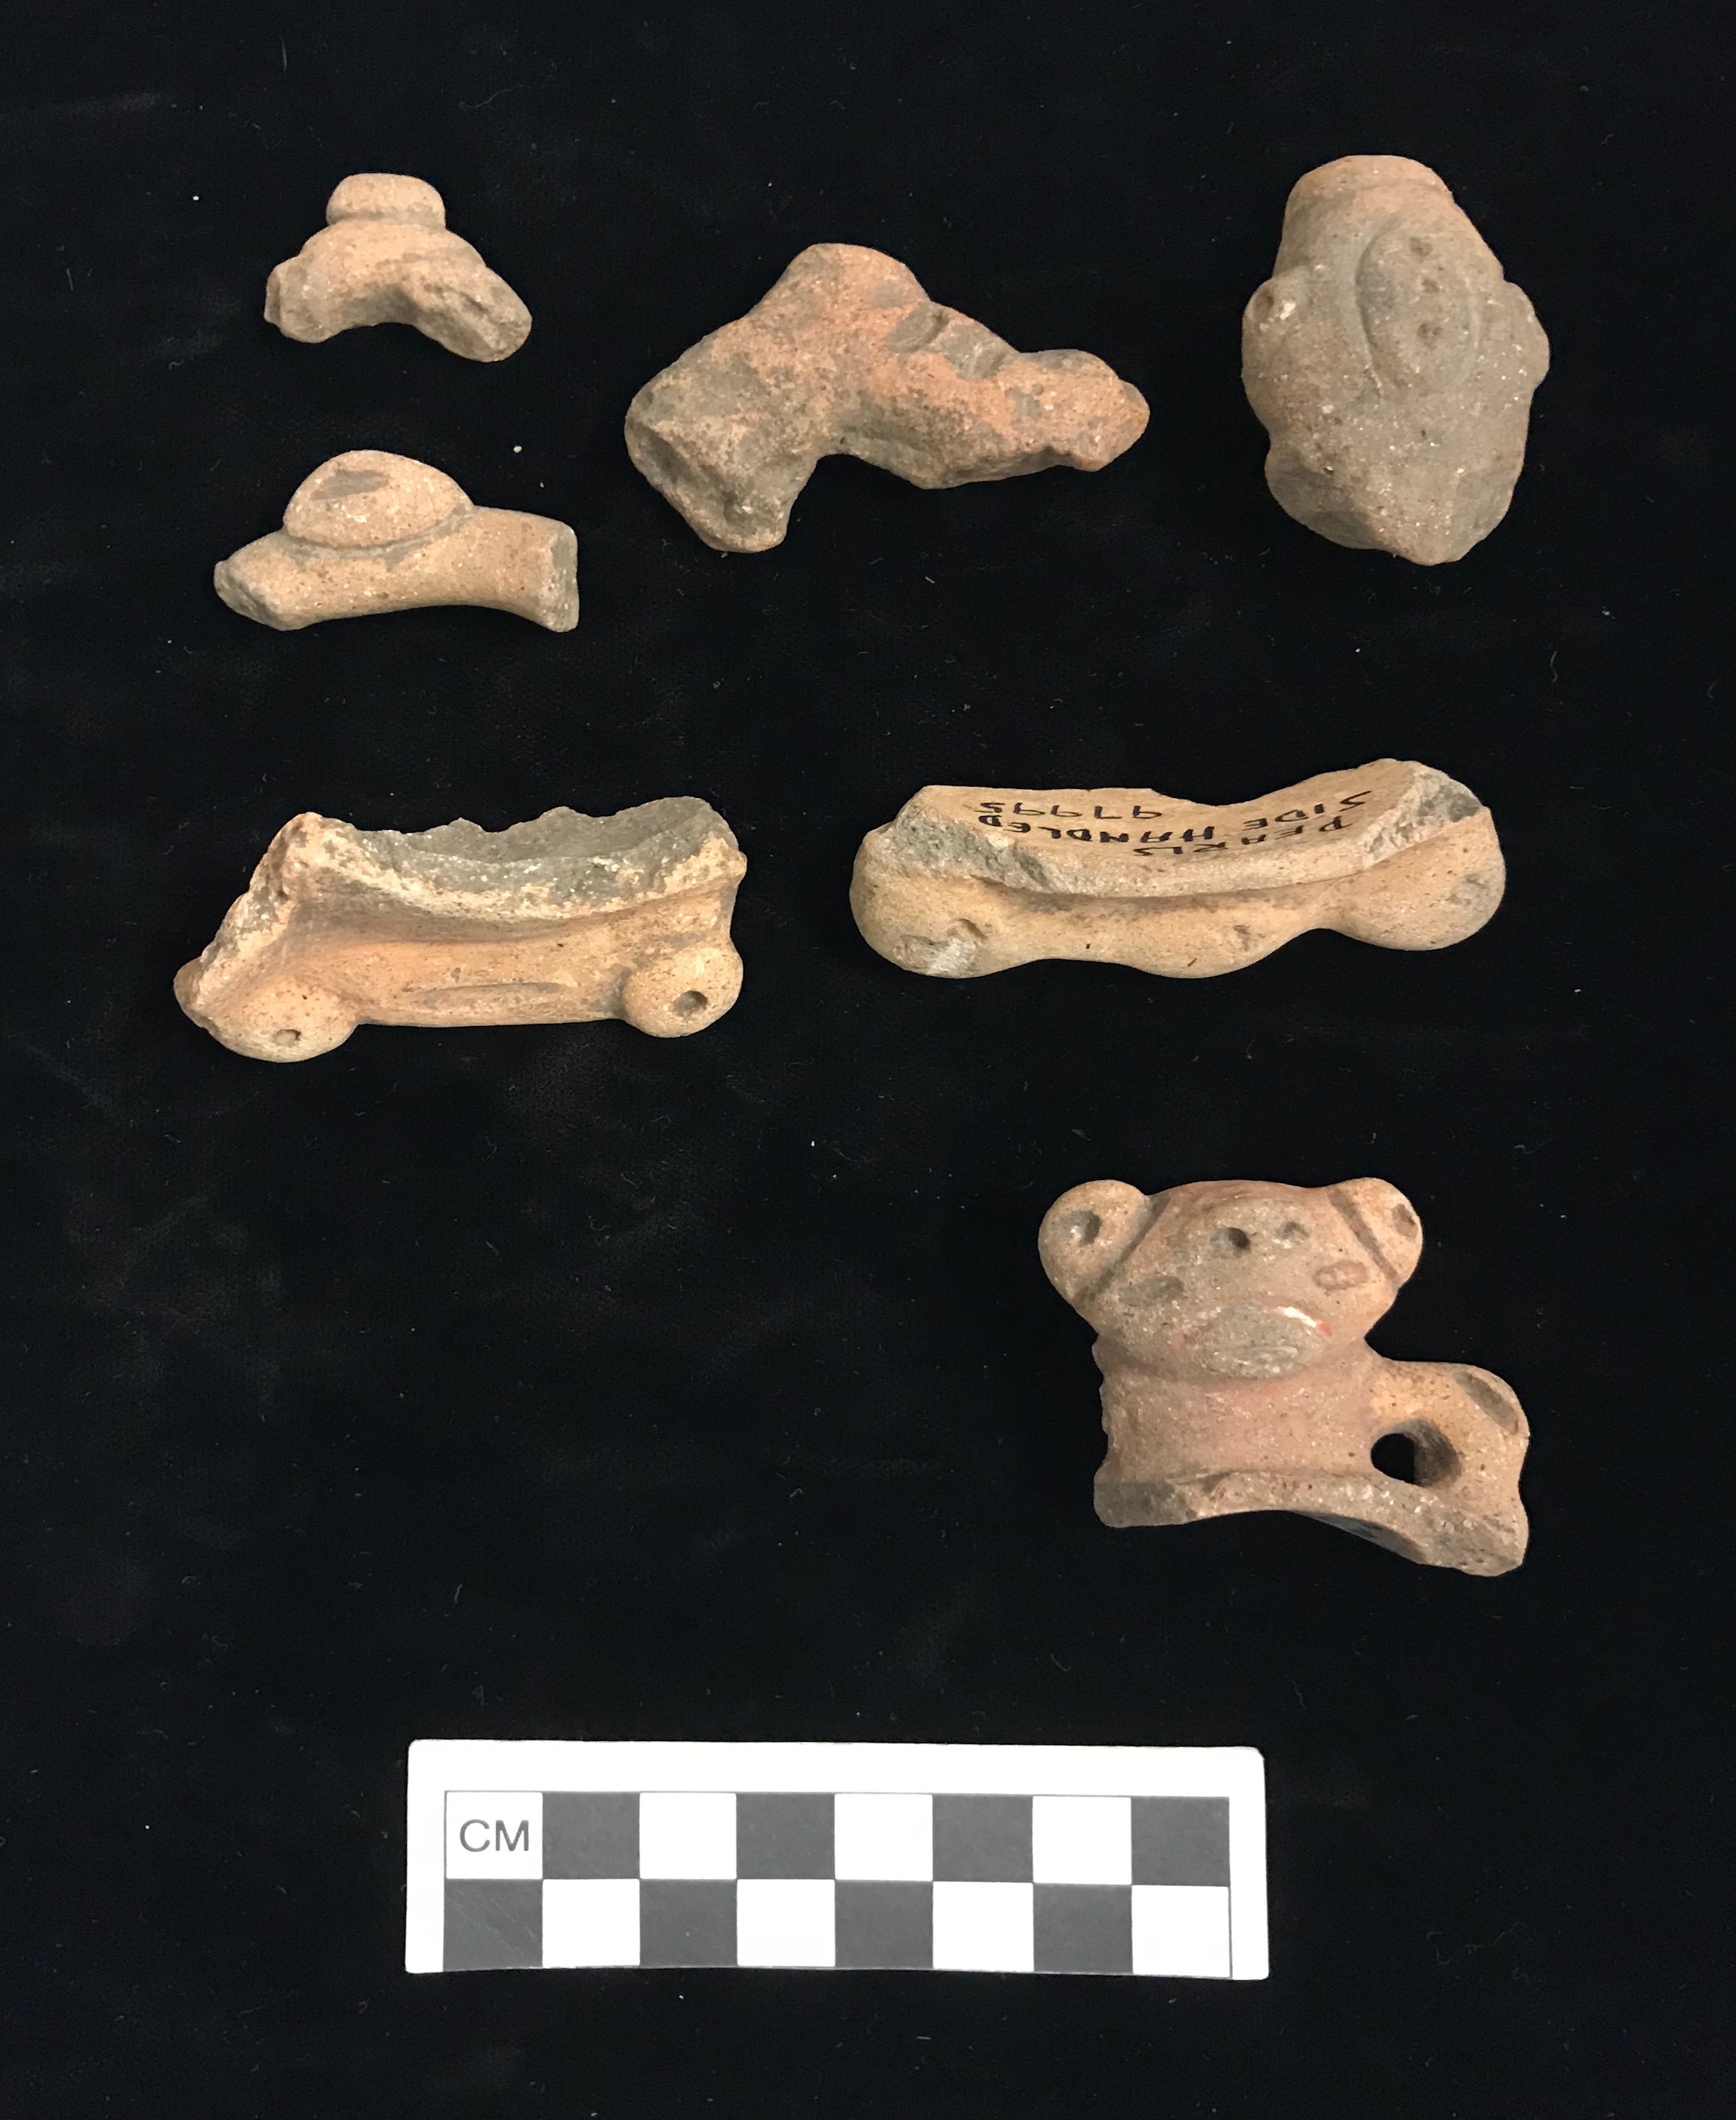 Plate VII. PEARLS ROD HANDLED AND SIDE HANDLED SHERDS. FLMNH Acc. Nos. 97990, 97993,and 97995.